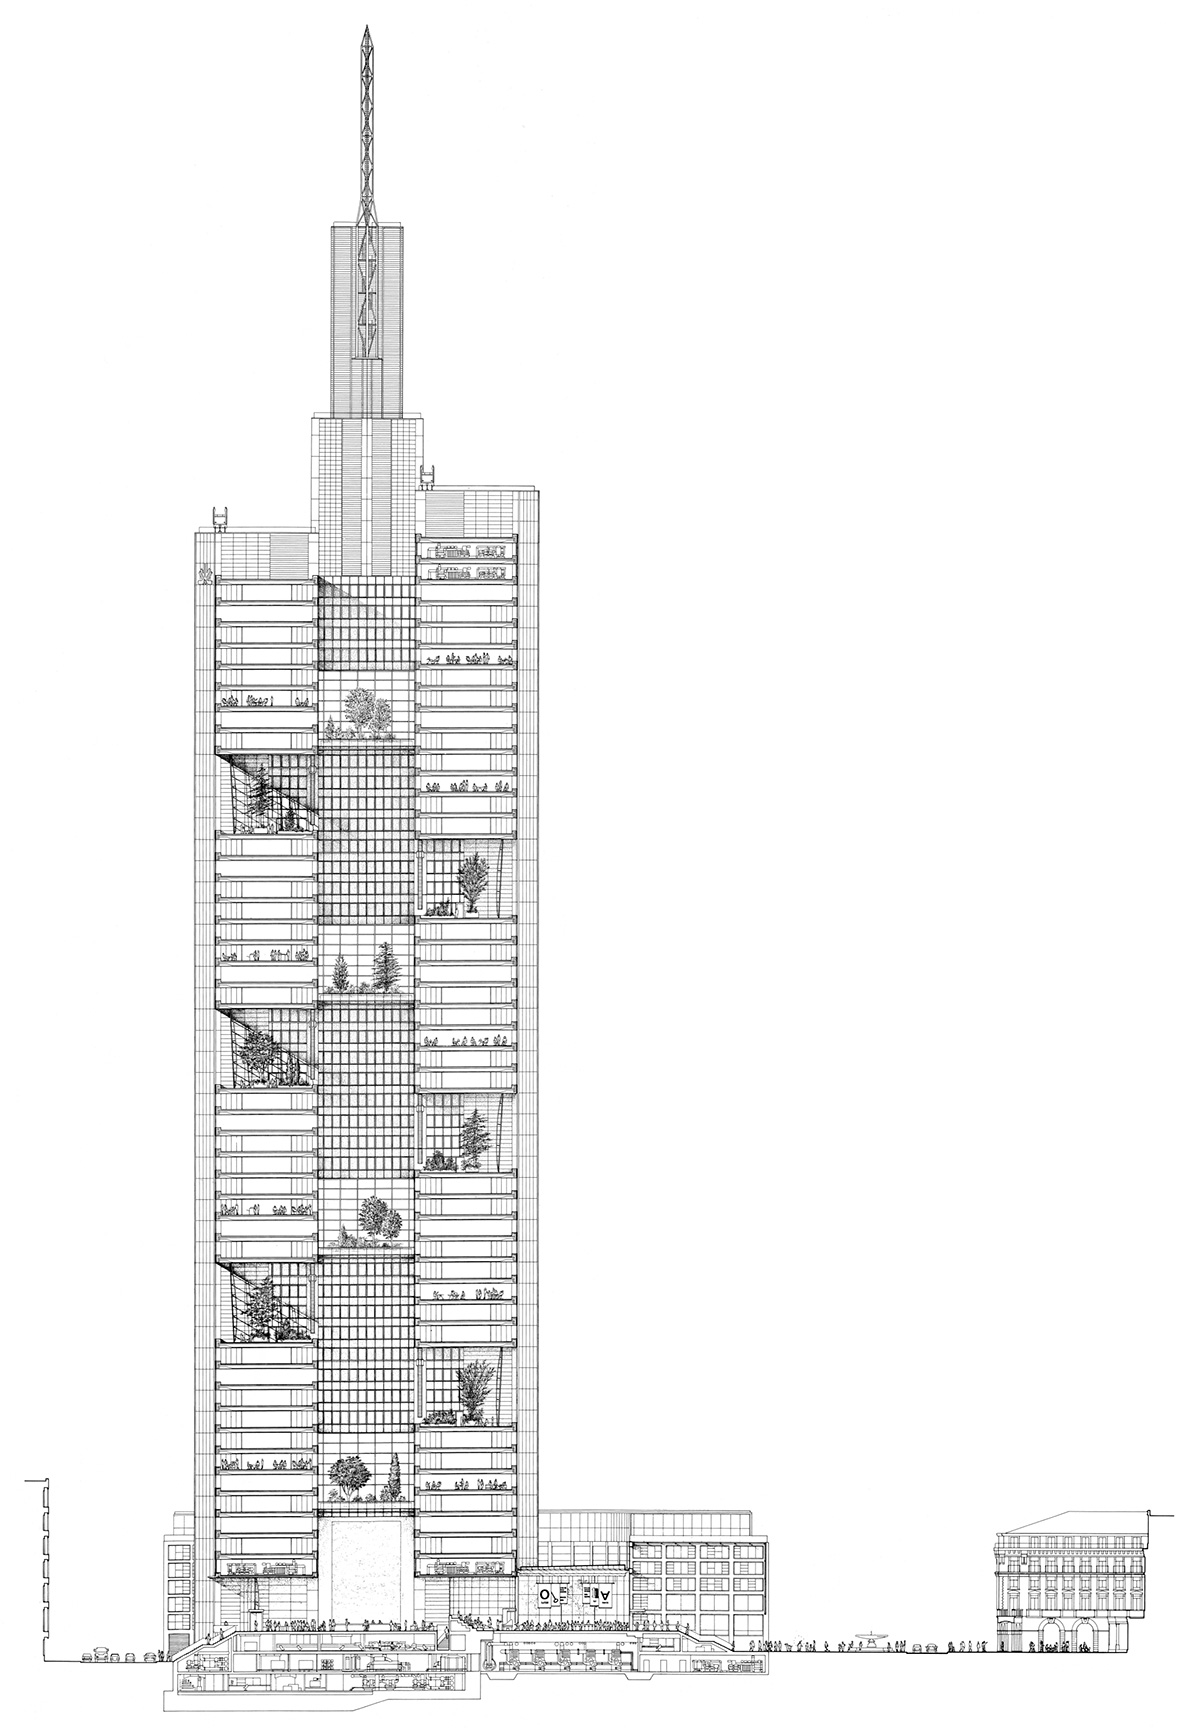 Section through the Commerzbank Tower in Frankfurt by Foster + Partners showing the sky gardens dispersed throughout the structure. These allow more natural light to penetrate the interior, reducing the need for artificial sourcesand cultivating a general sense of well being. Despite its scale, Commerzbank was one ofthe first genuinely ‘ecological’ skyscrapers.